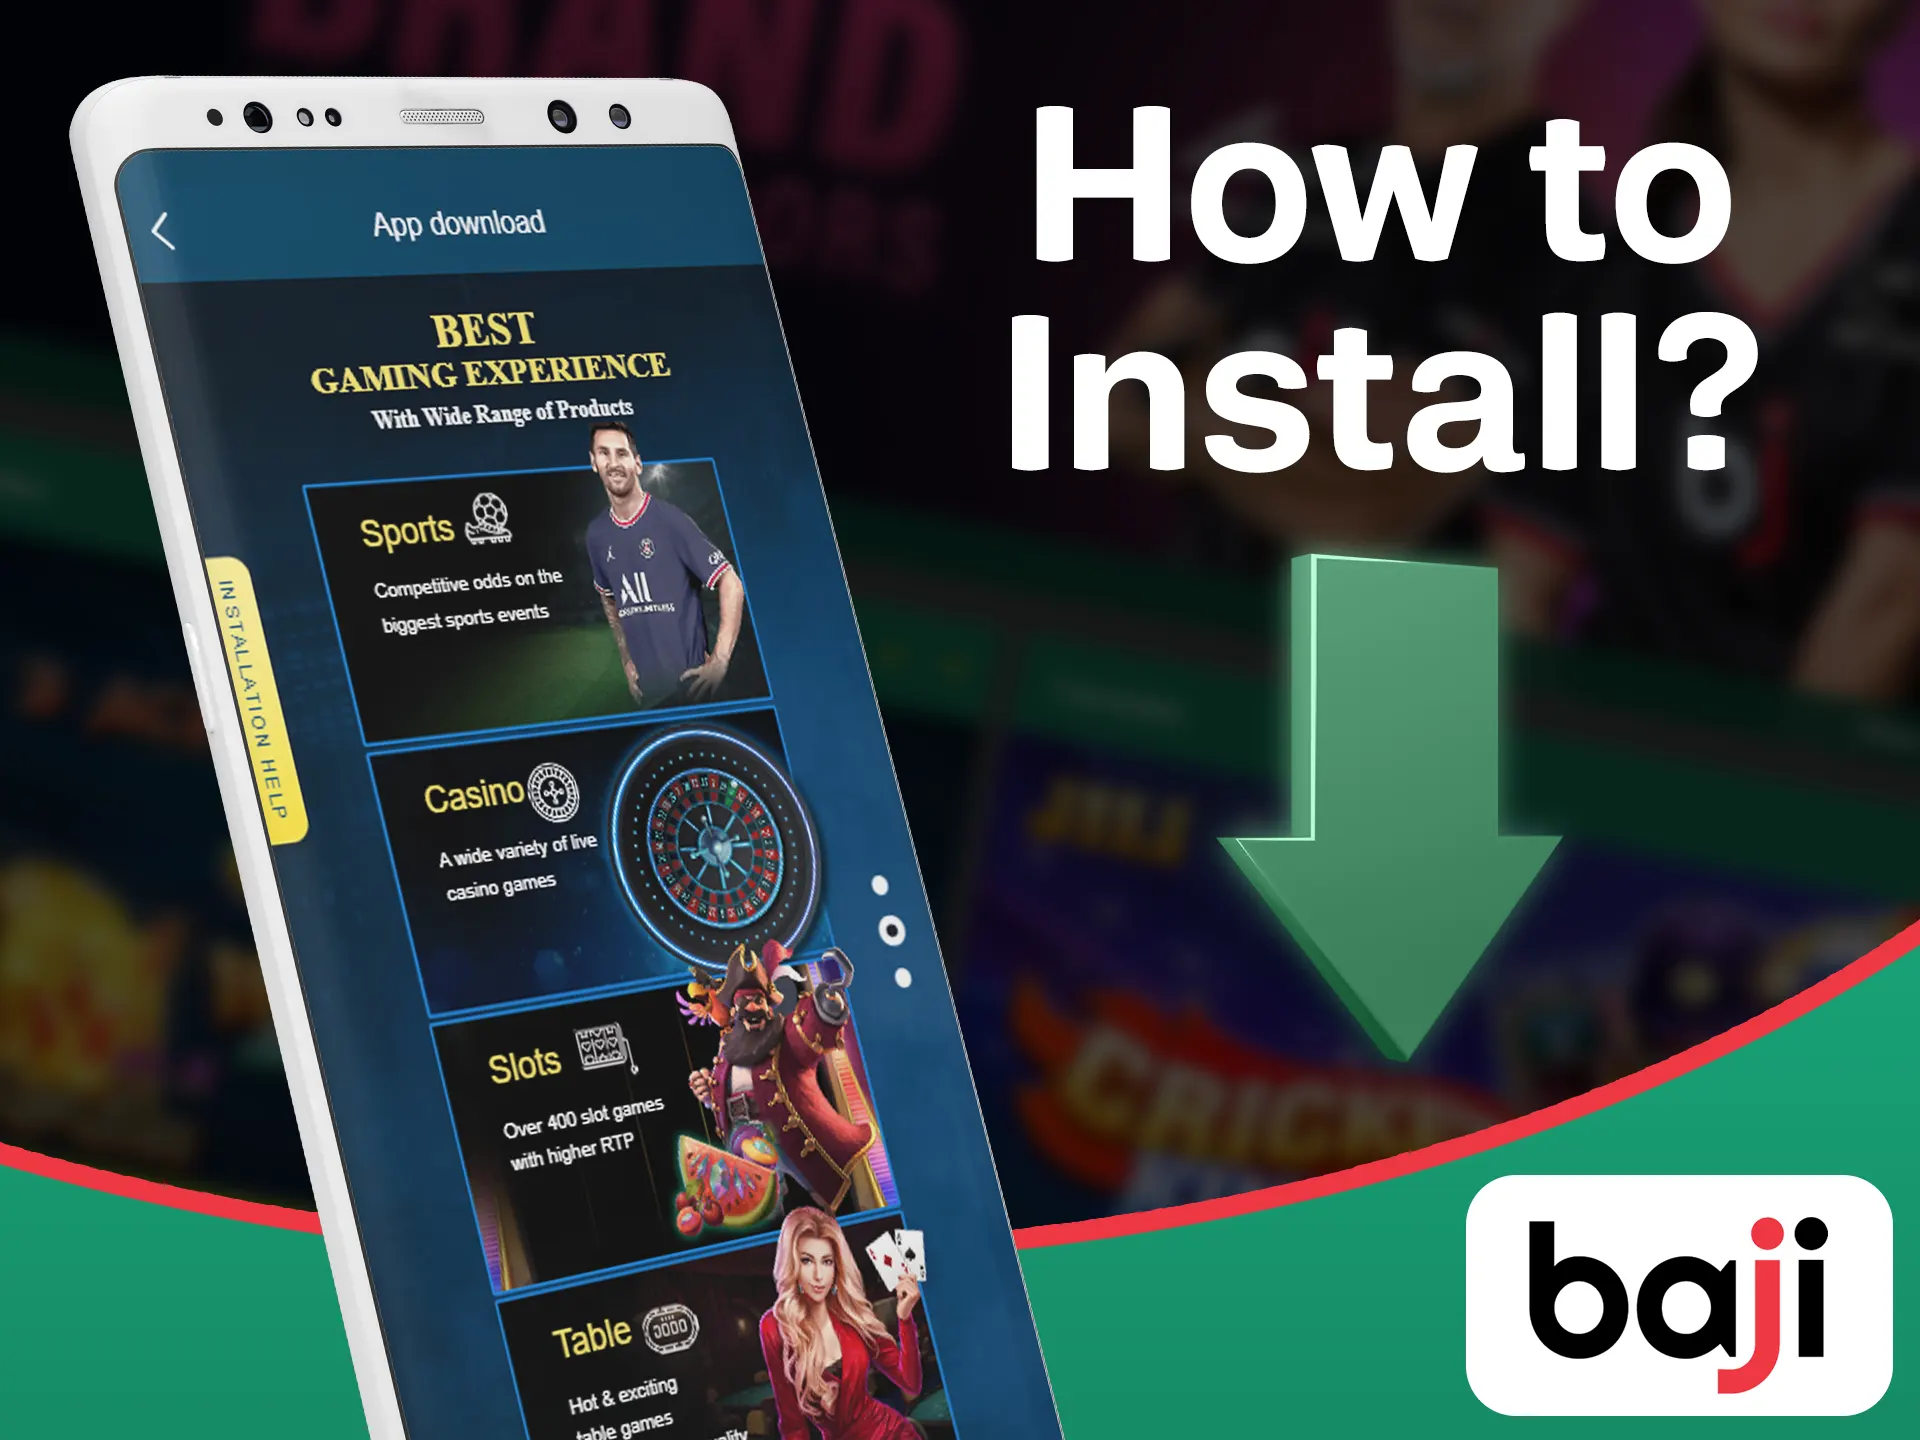 It's easy to install the Baji app on your phone.